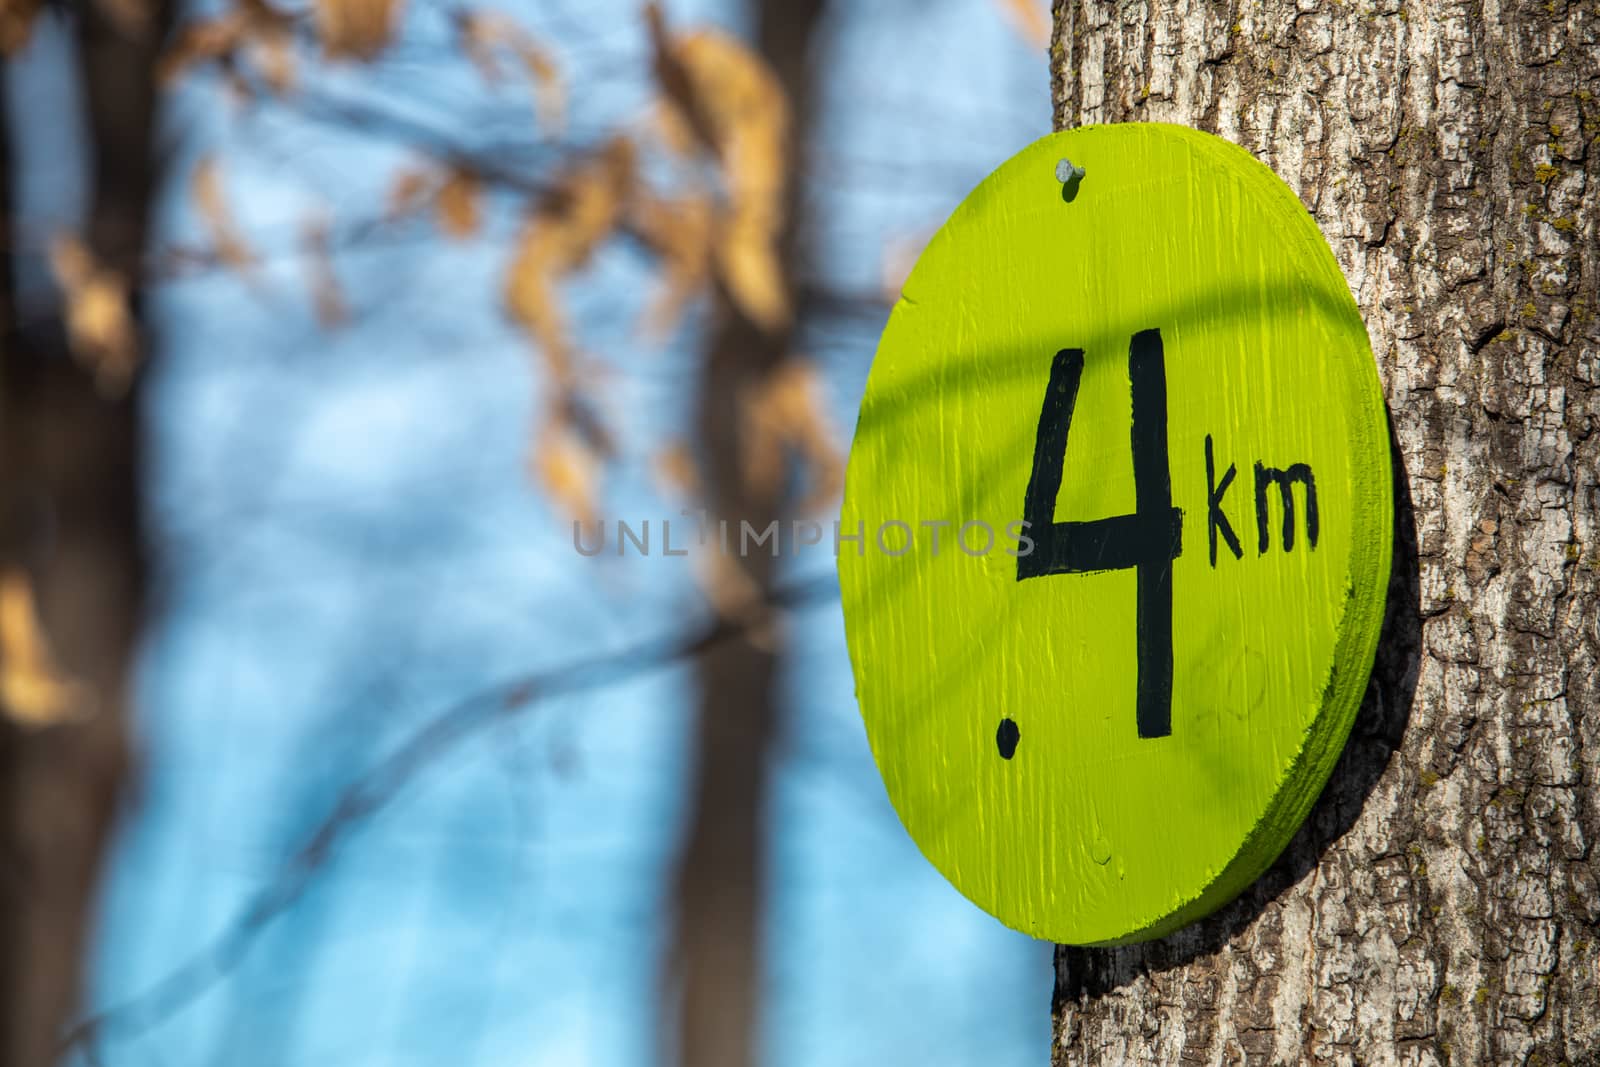 A trail marker nailed to a tree shows a distance of 4 kilometers traveled along a nature trail. The wooden sign is painted green and viewed close up, with nearly-bare trees out of focus behind it.